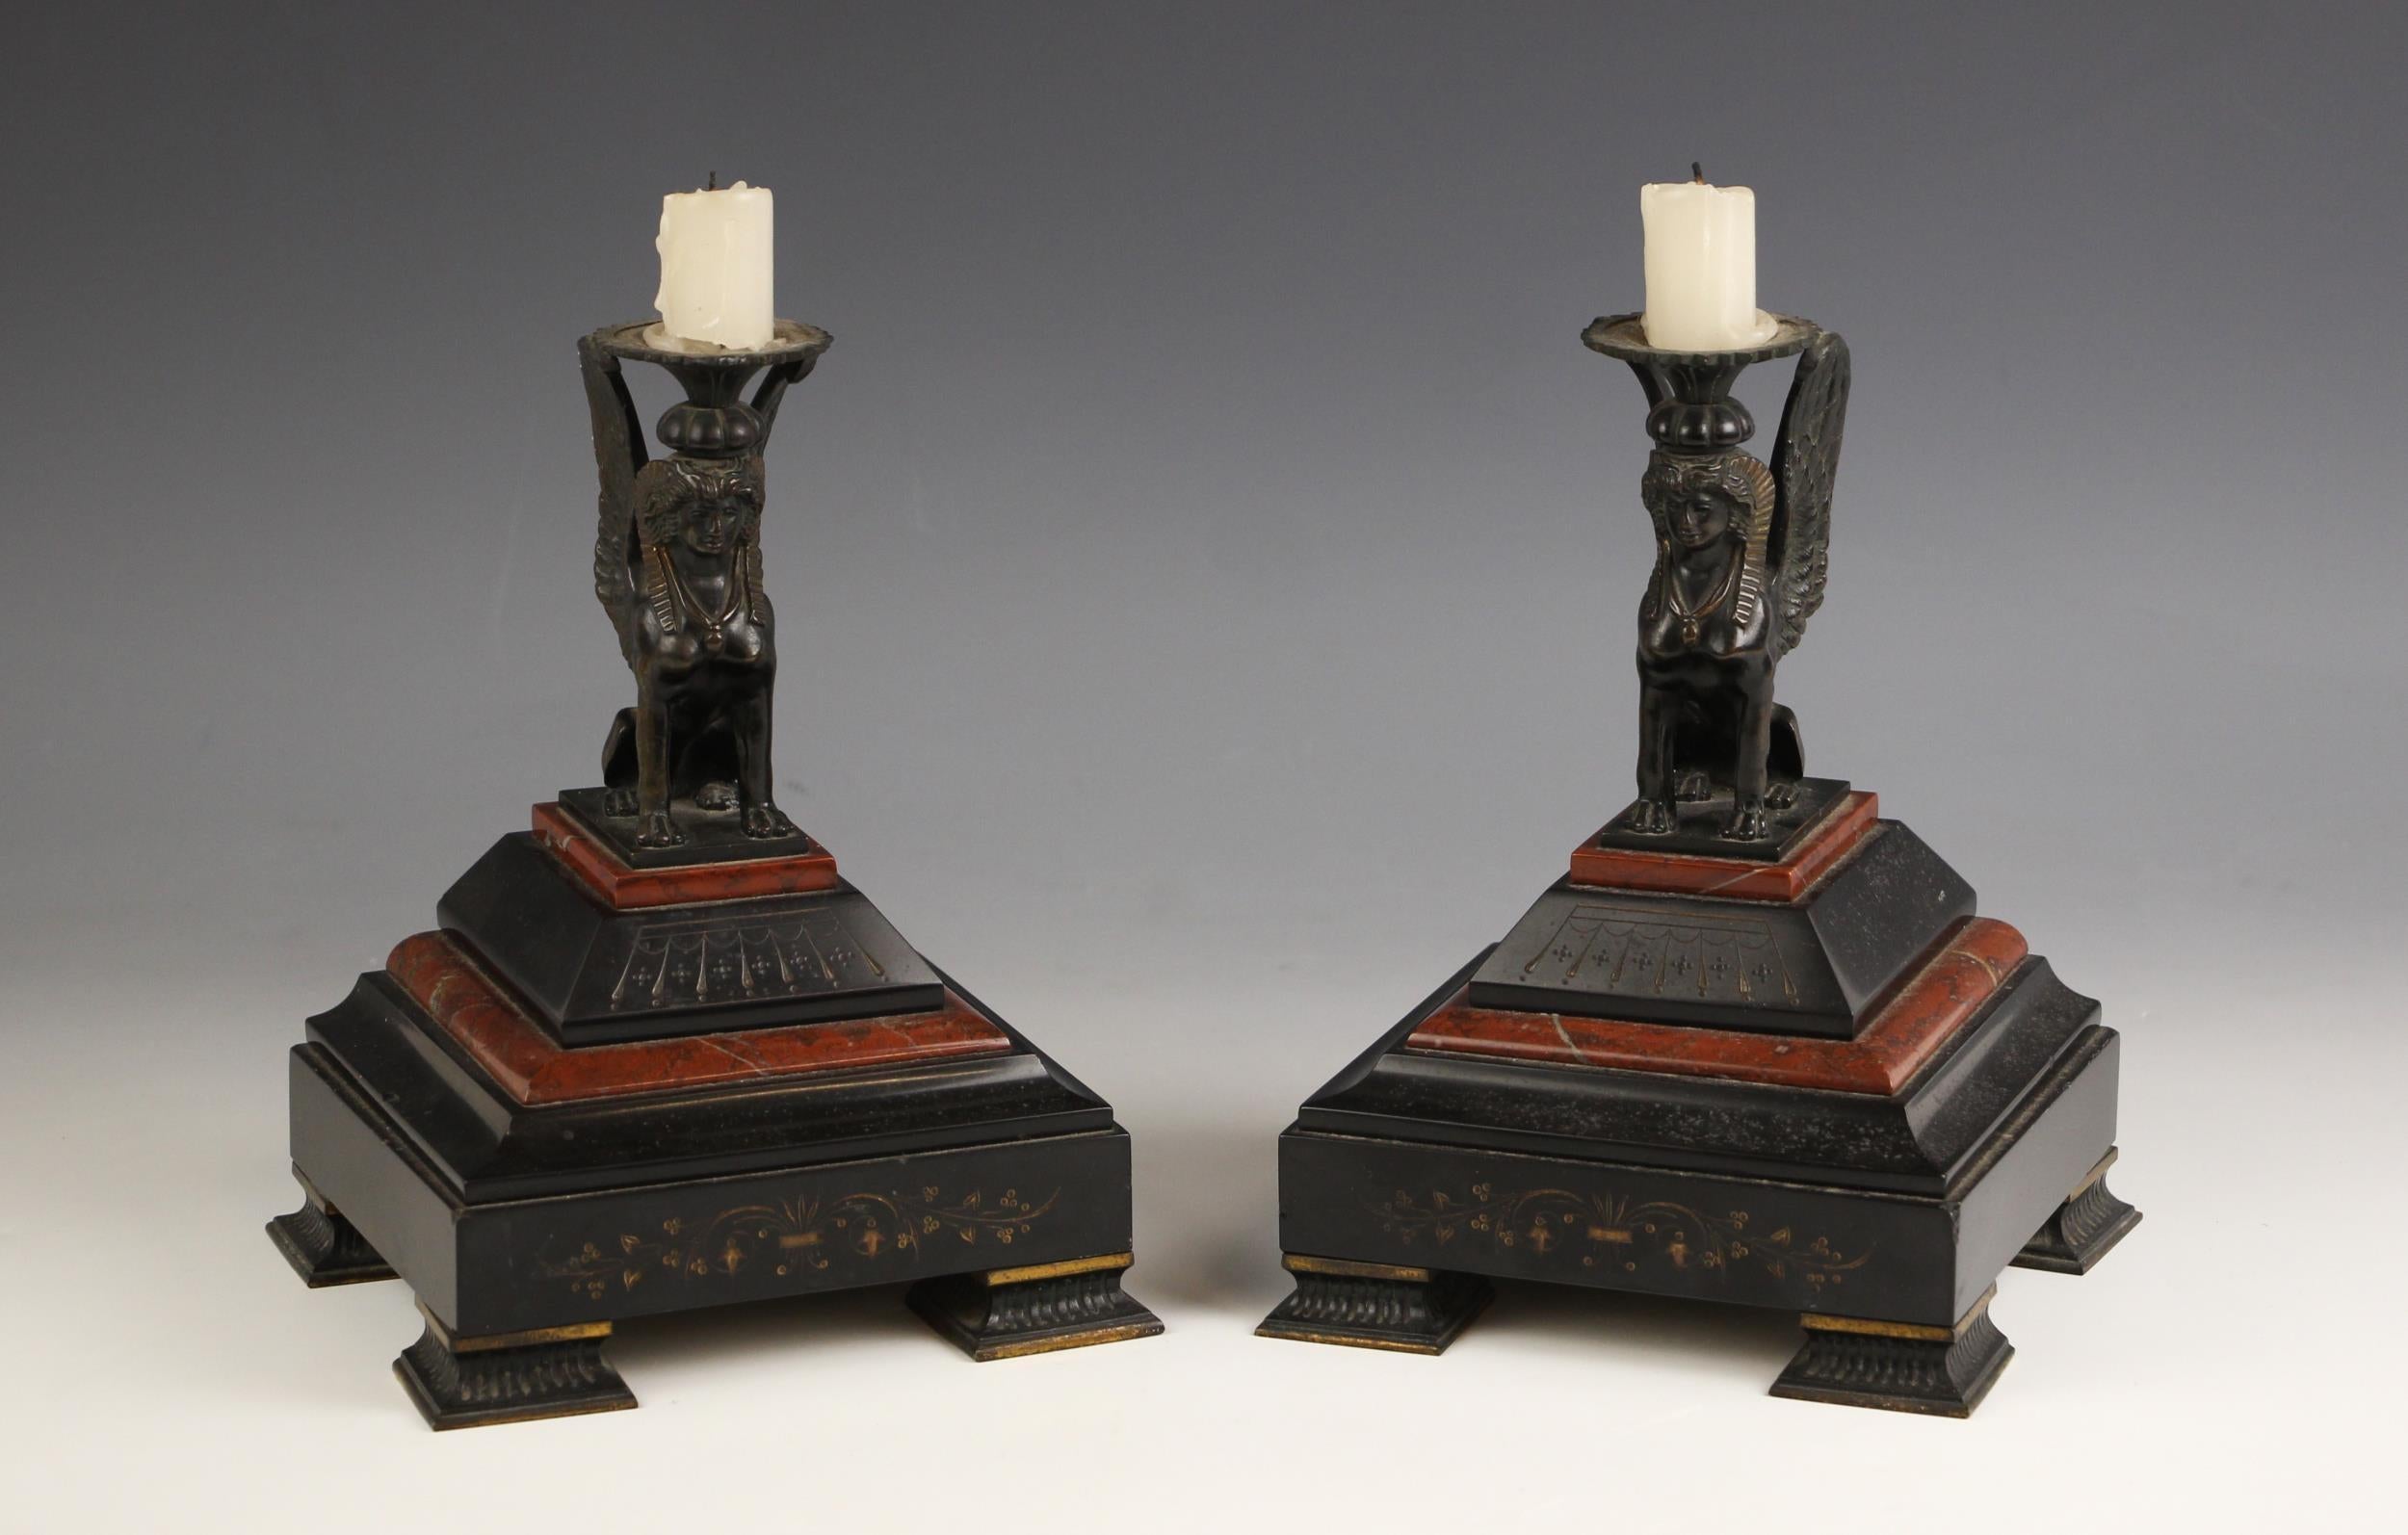 Pair of Victorian Egyptian Revival Bronze & Rouge Marble Sphinx Candle Holders
From a private English collection
Good condition.
Free international shipping.